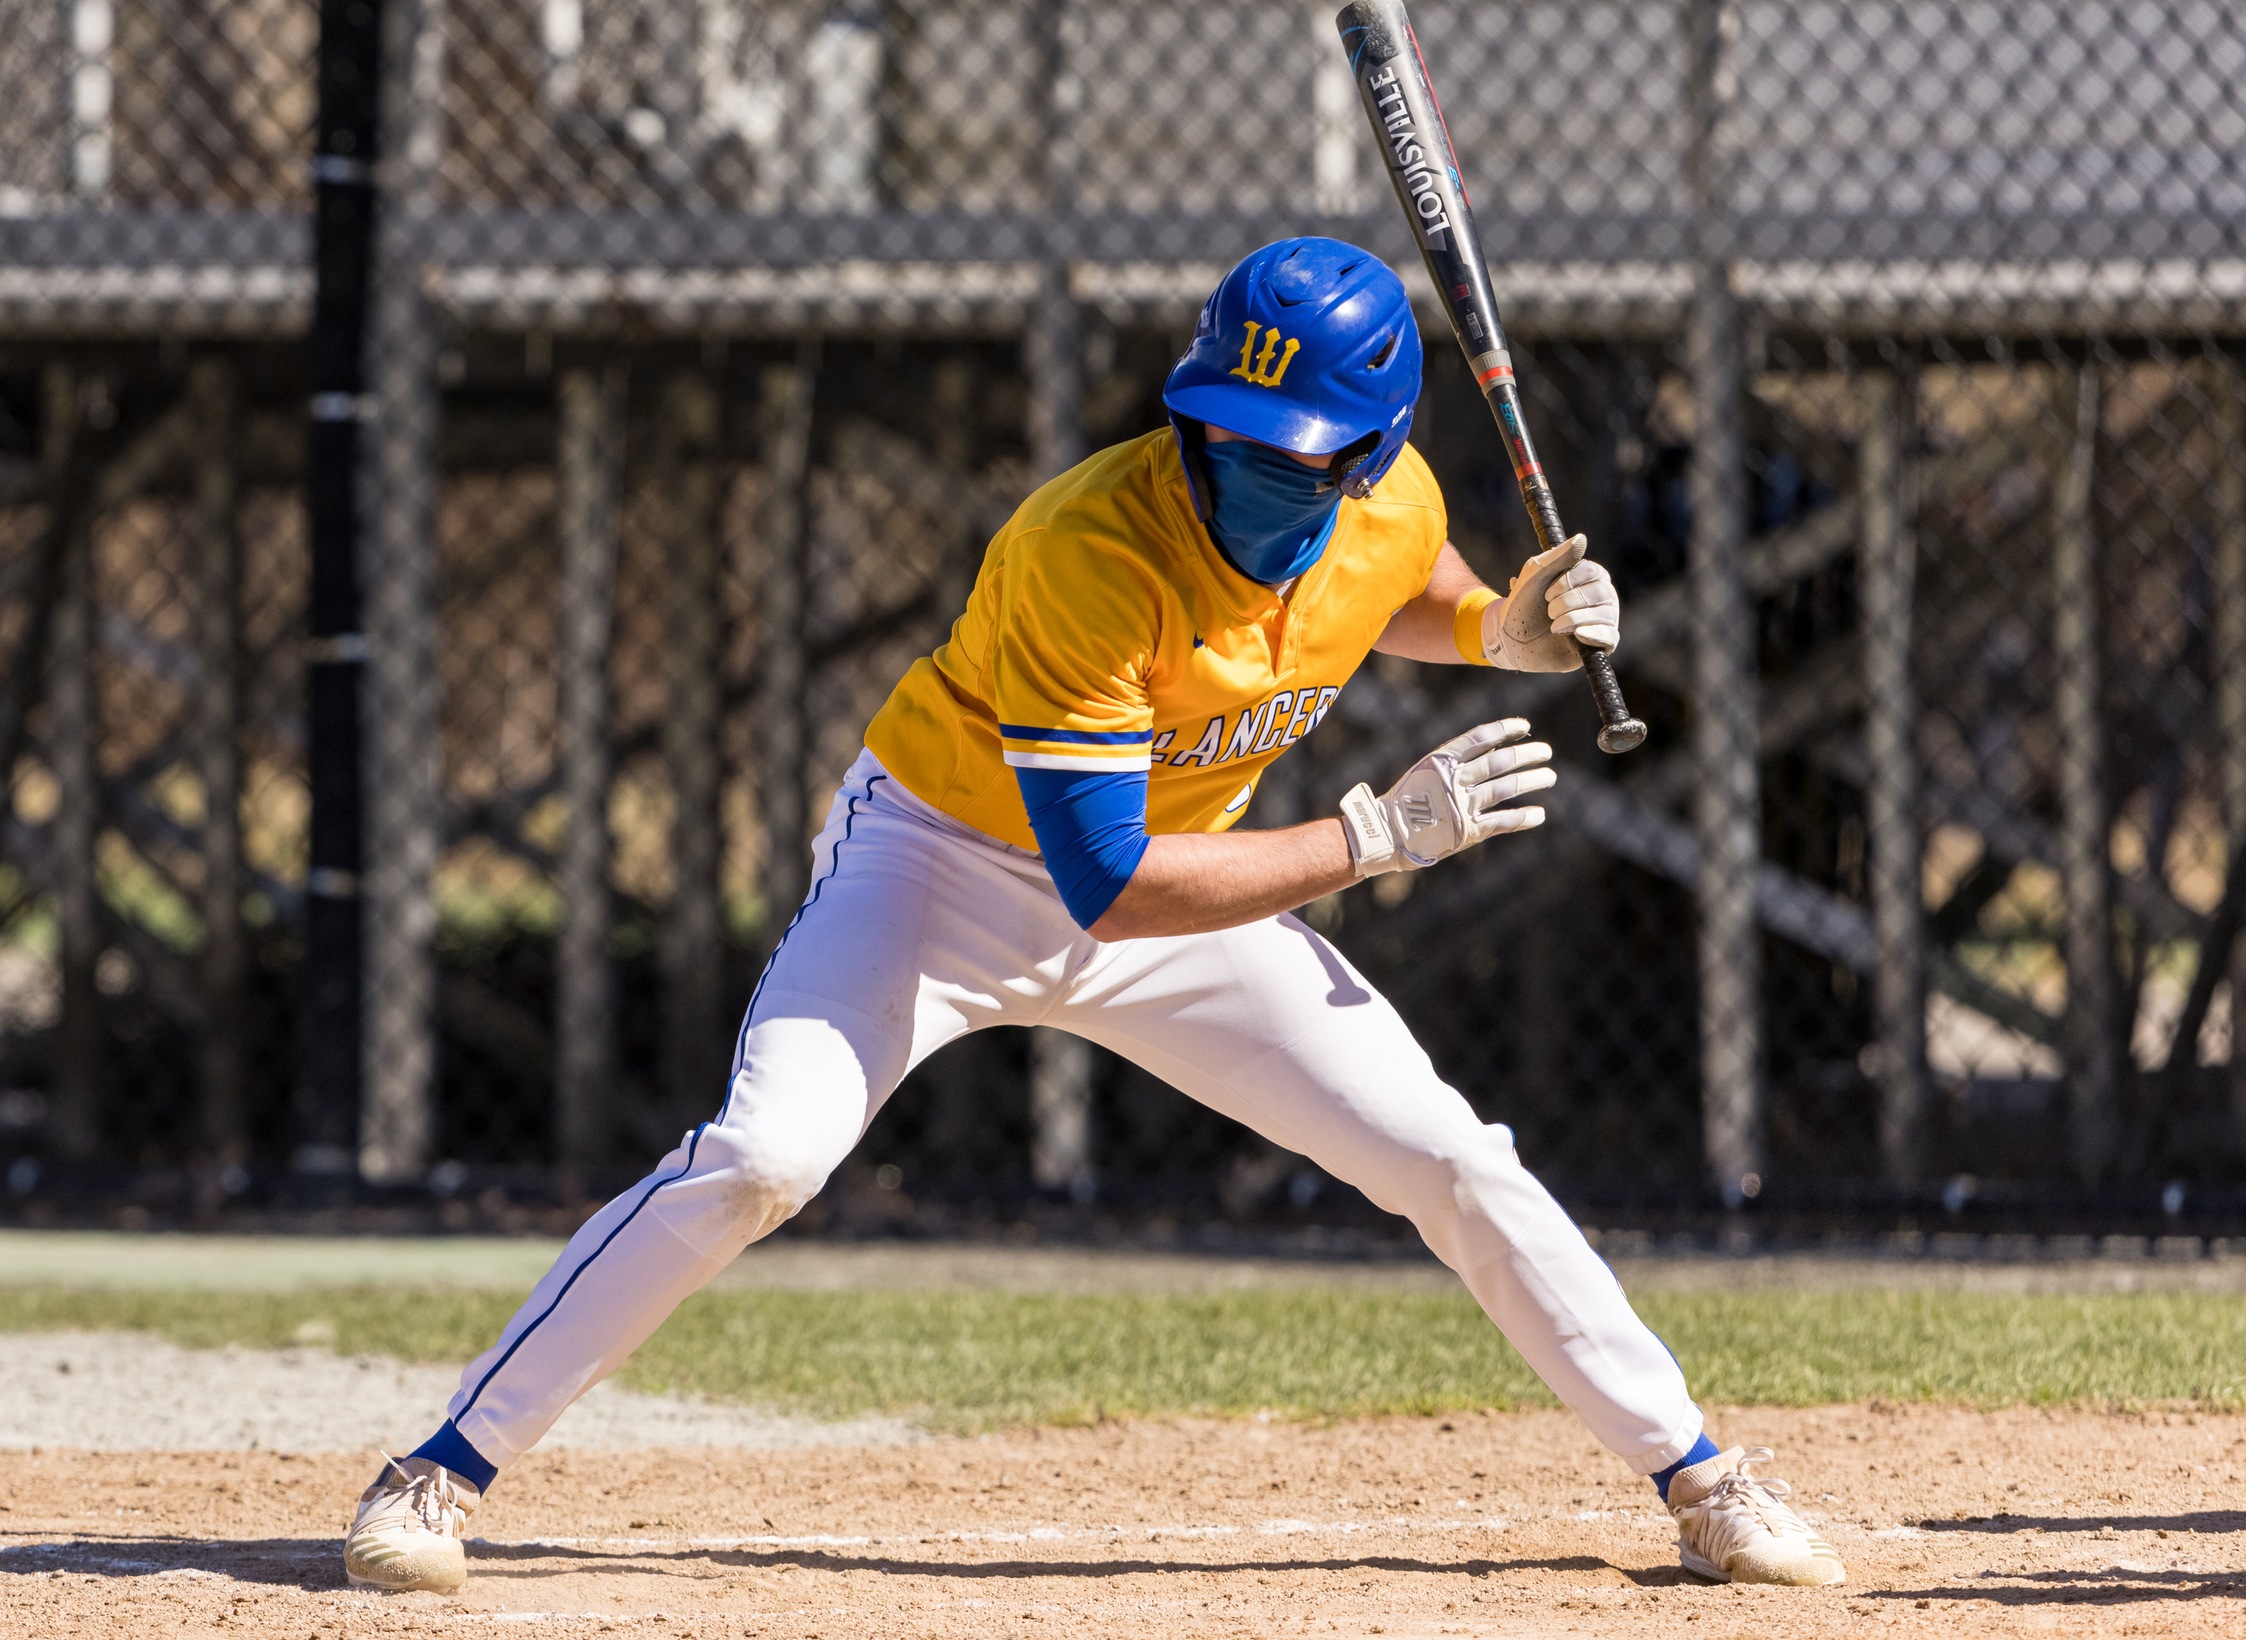 Game One Walkoff Highlights Baseball's Sweep over Framingham State